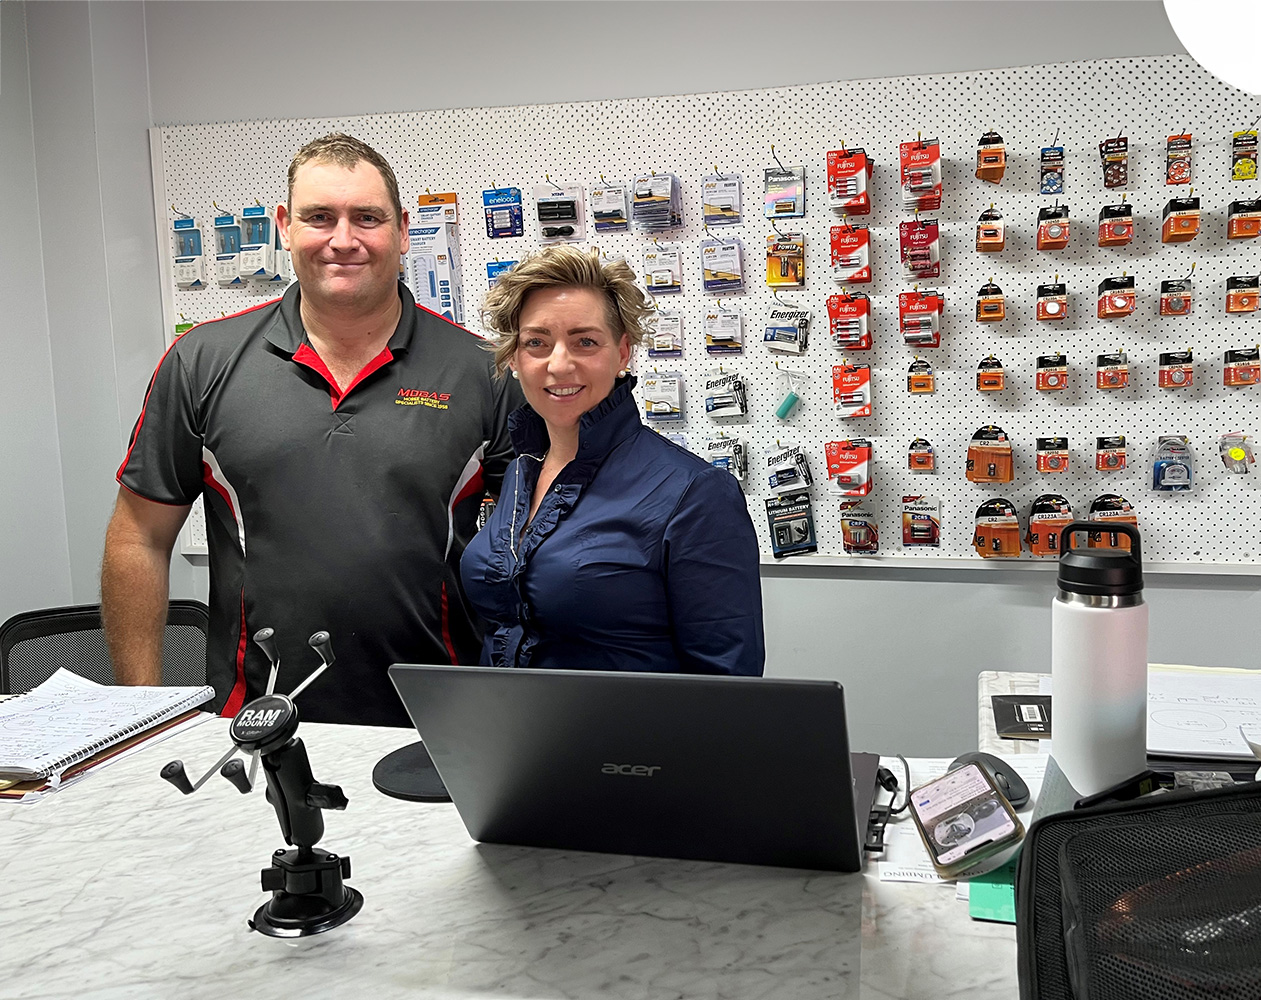 Craig and Melinda Atherton at the front desk of their auto supply business Mobas Batteries